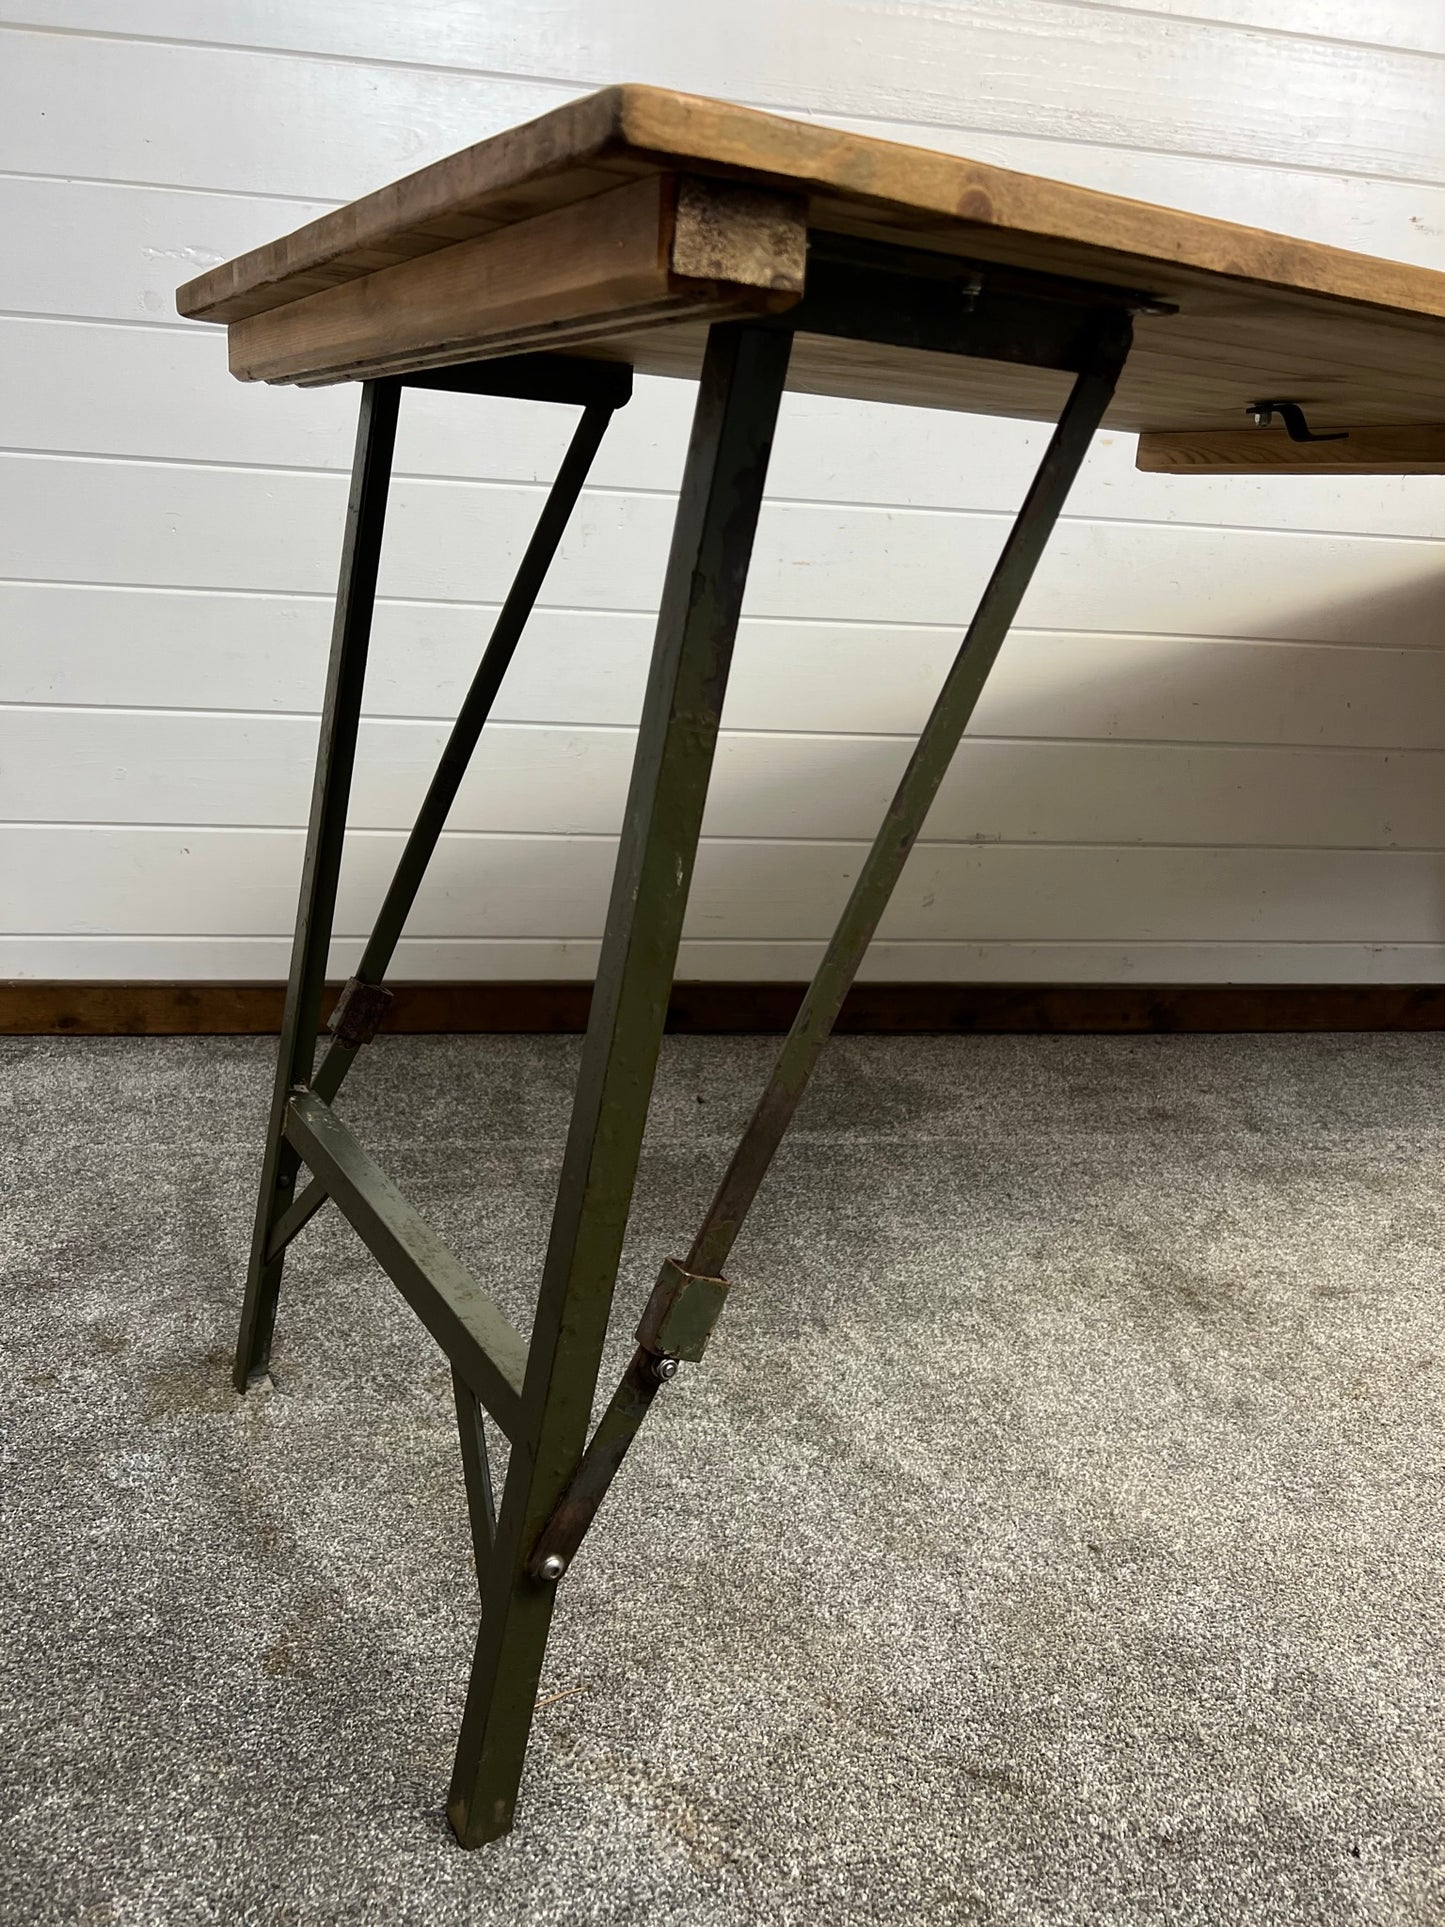 Rustic Vintage Wooden Folding Trestle Table Industrial Farmhouse Dining Desk Reclaimed Army